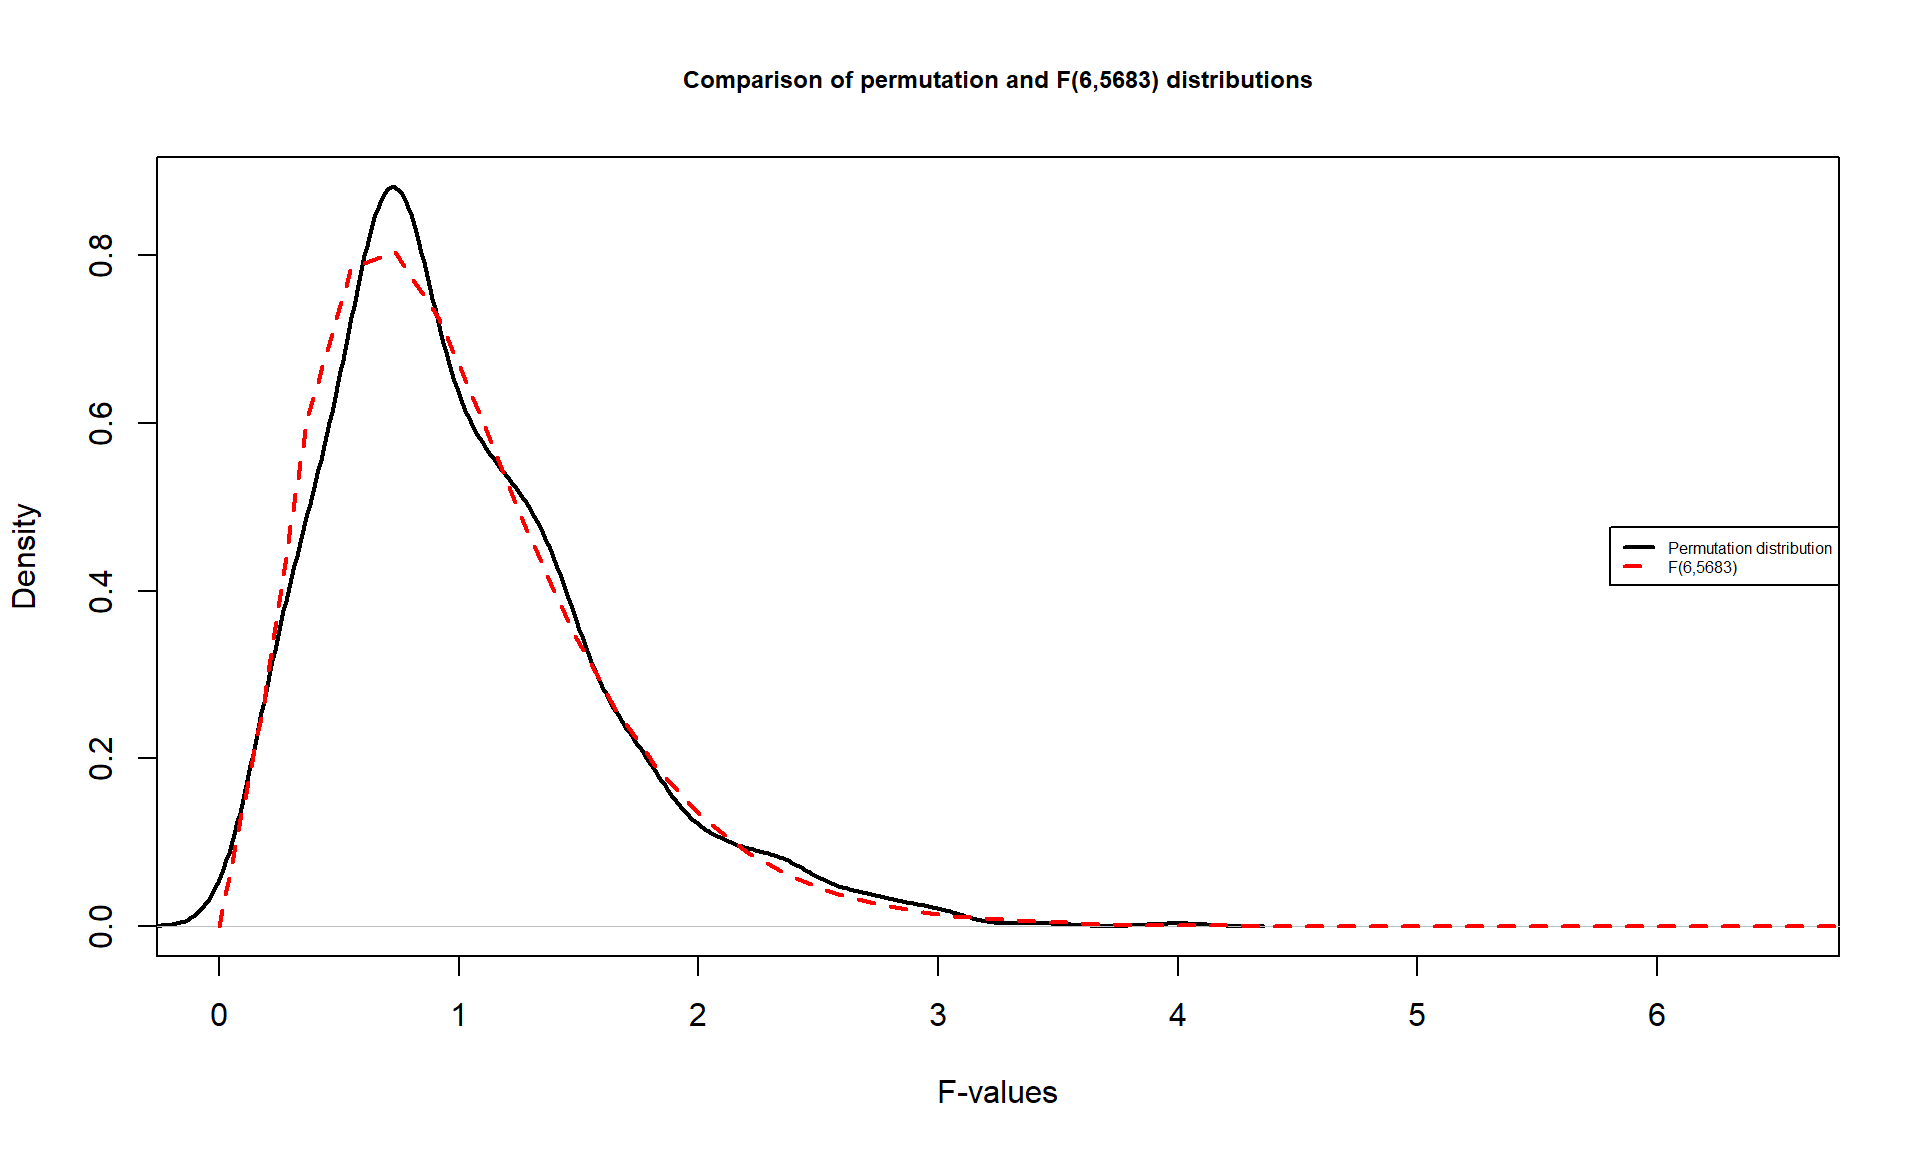 Comparison of \(F(6, 6583)\) (dashed line) and permutation distribution (solid line).